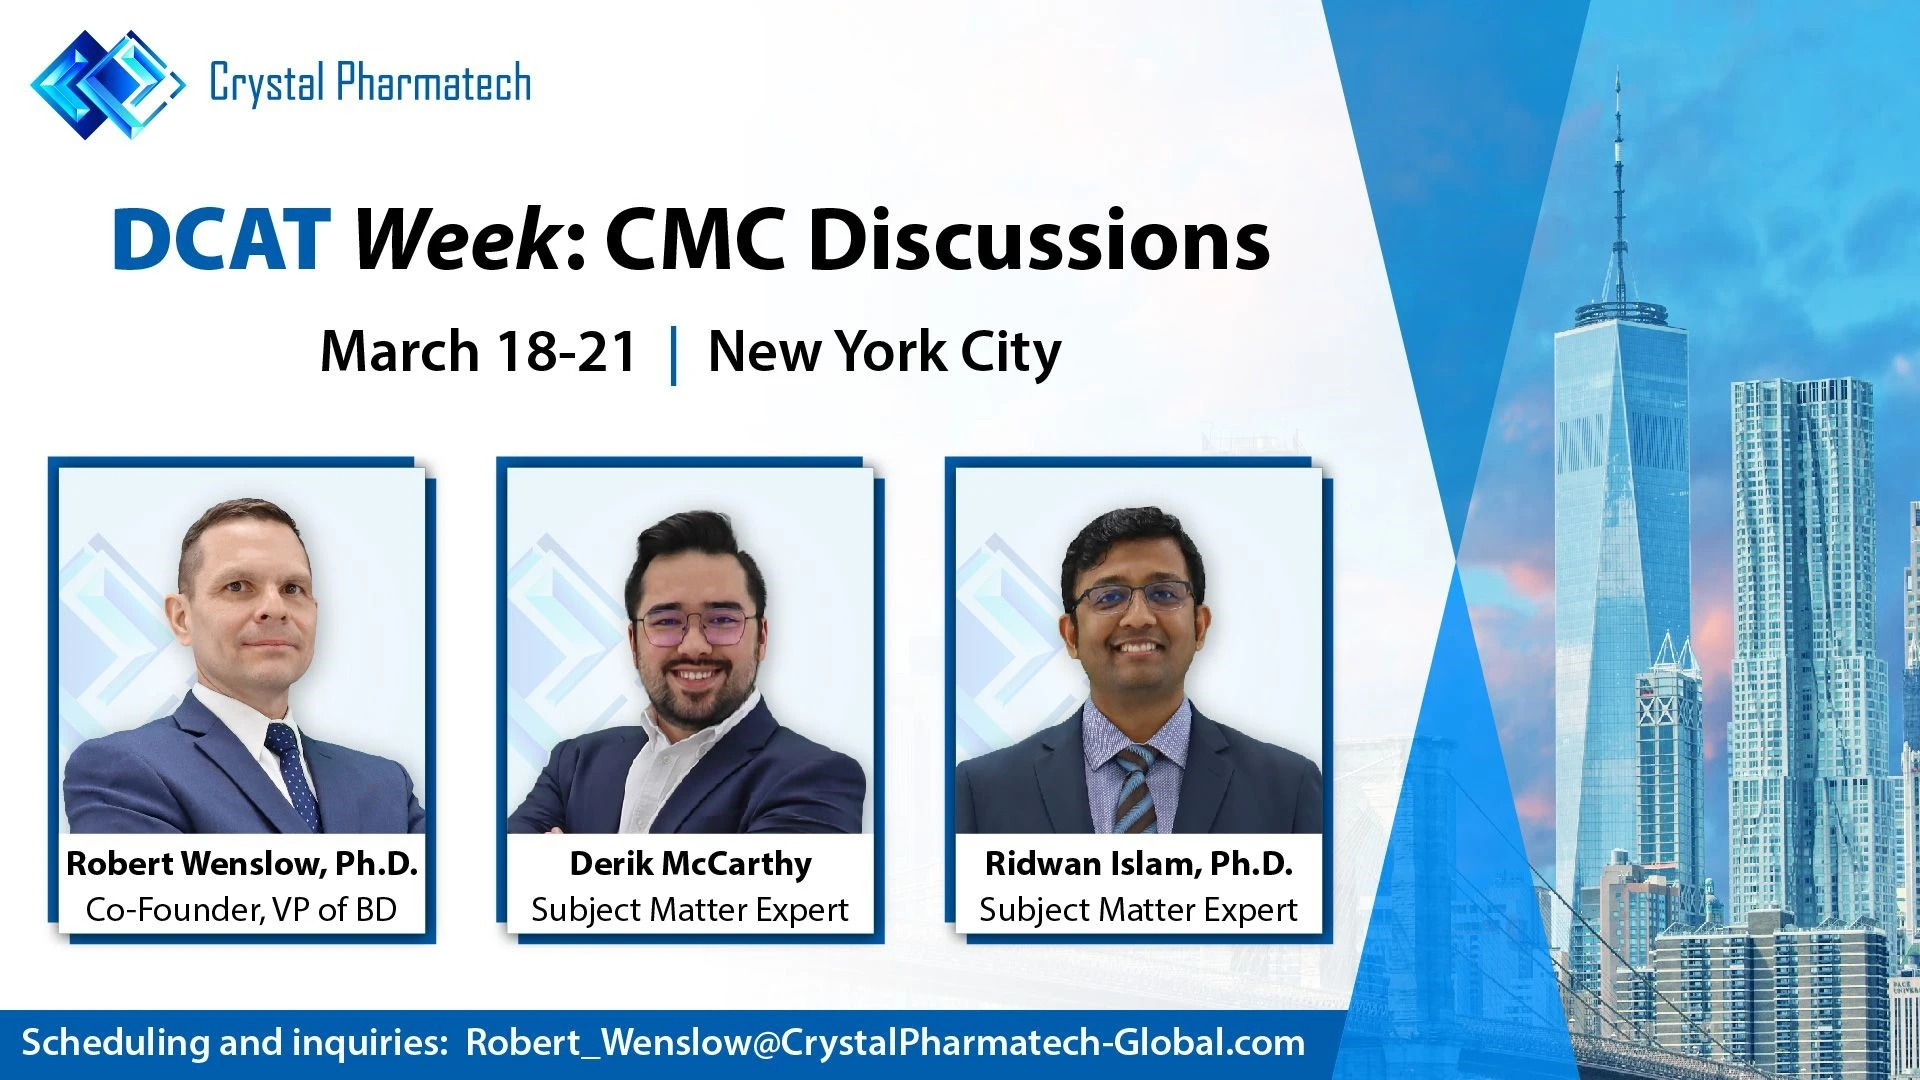 DCAT WEEK: CMC Discussions